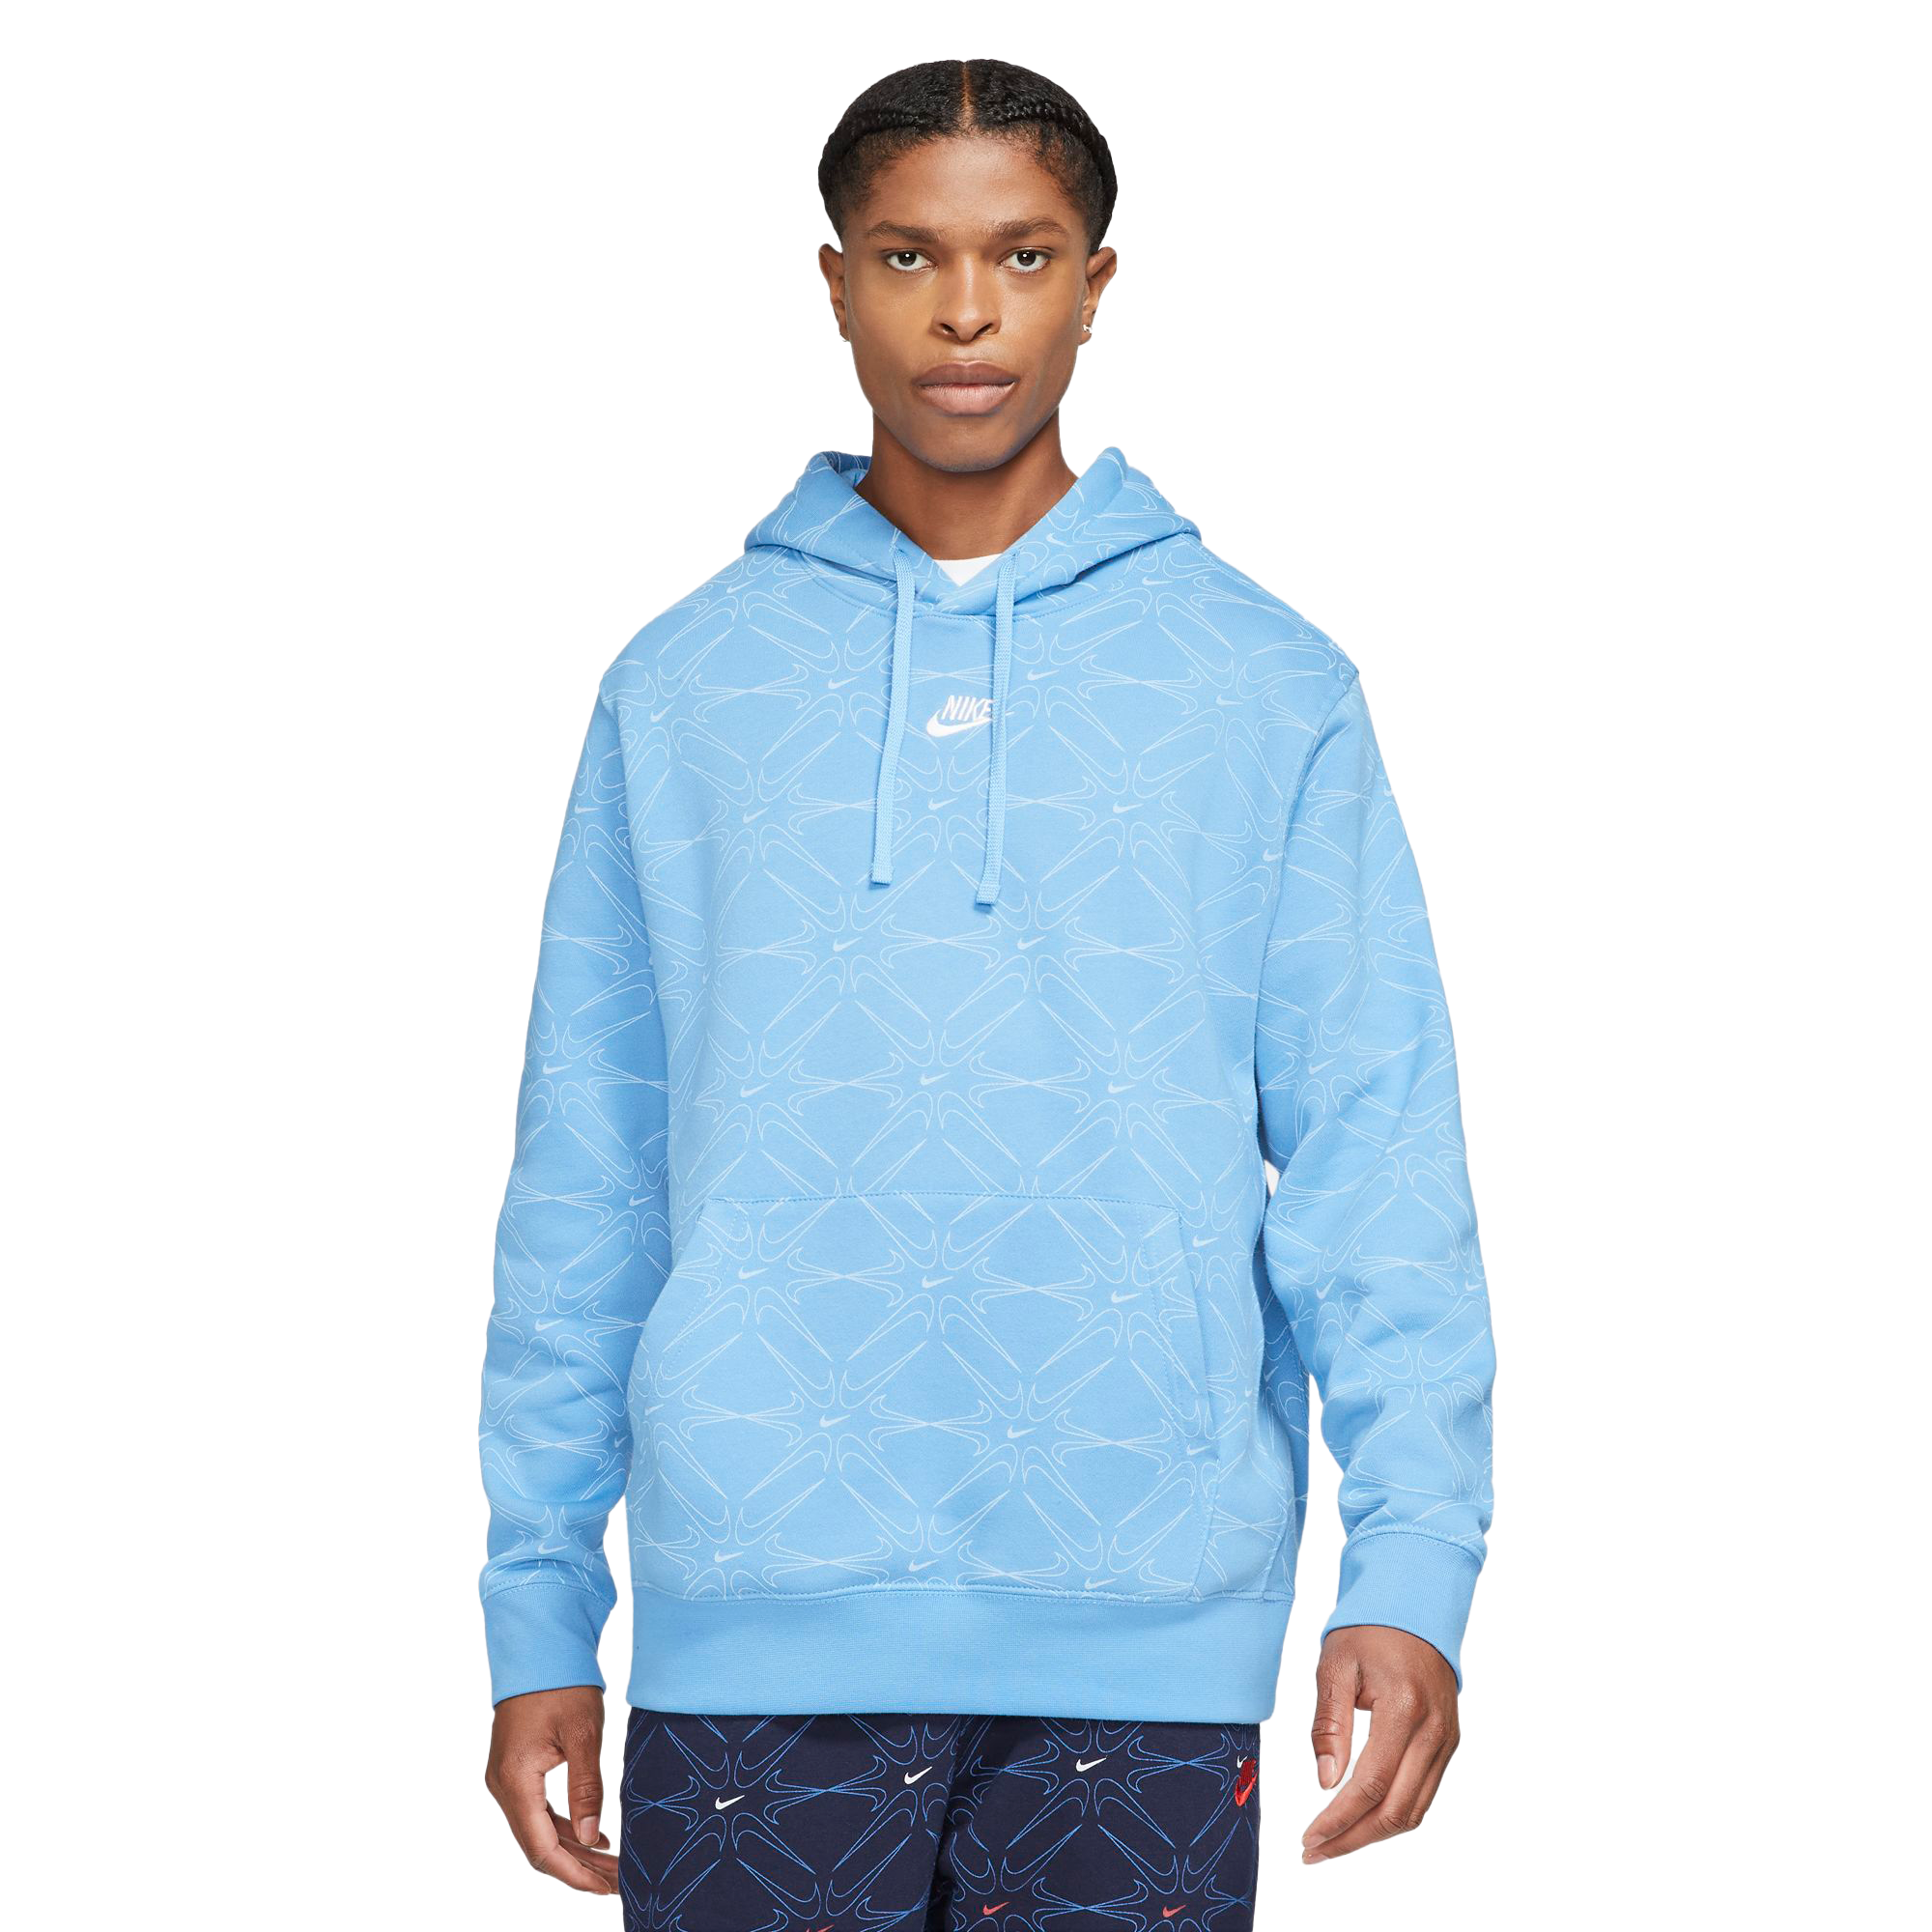 nike pullover sweater mens